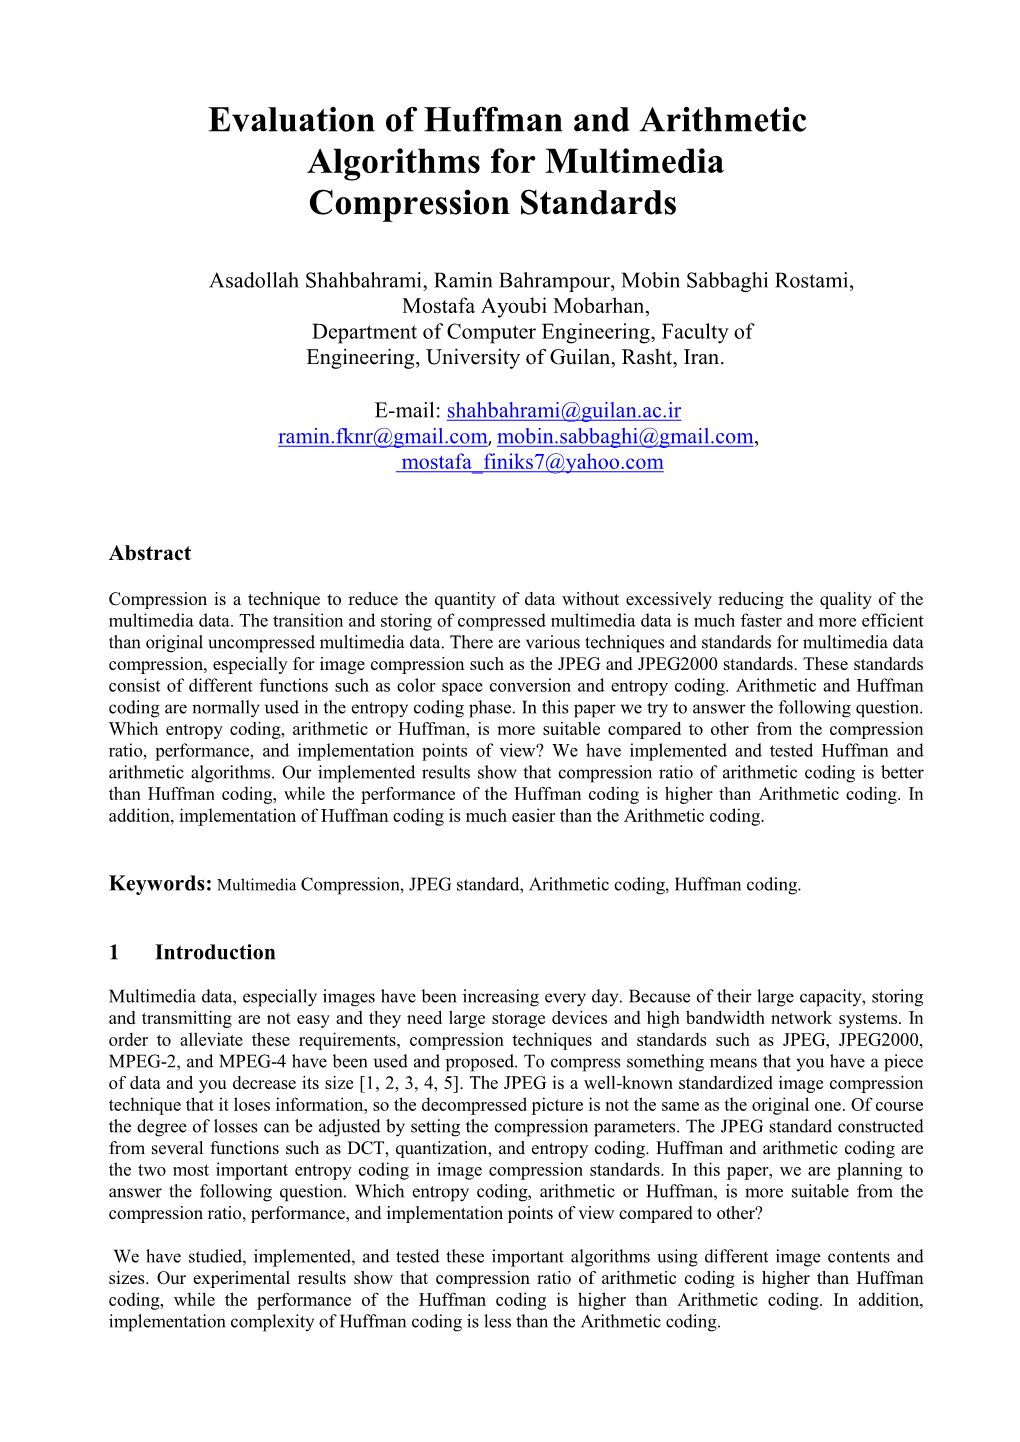 Evaluation of Huffman and Arithmetic Algorithms for Multimedia Compression Standards